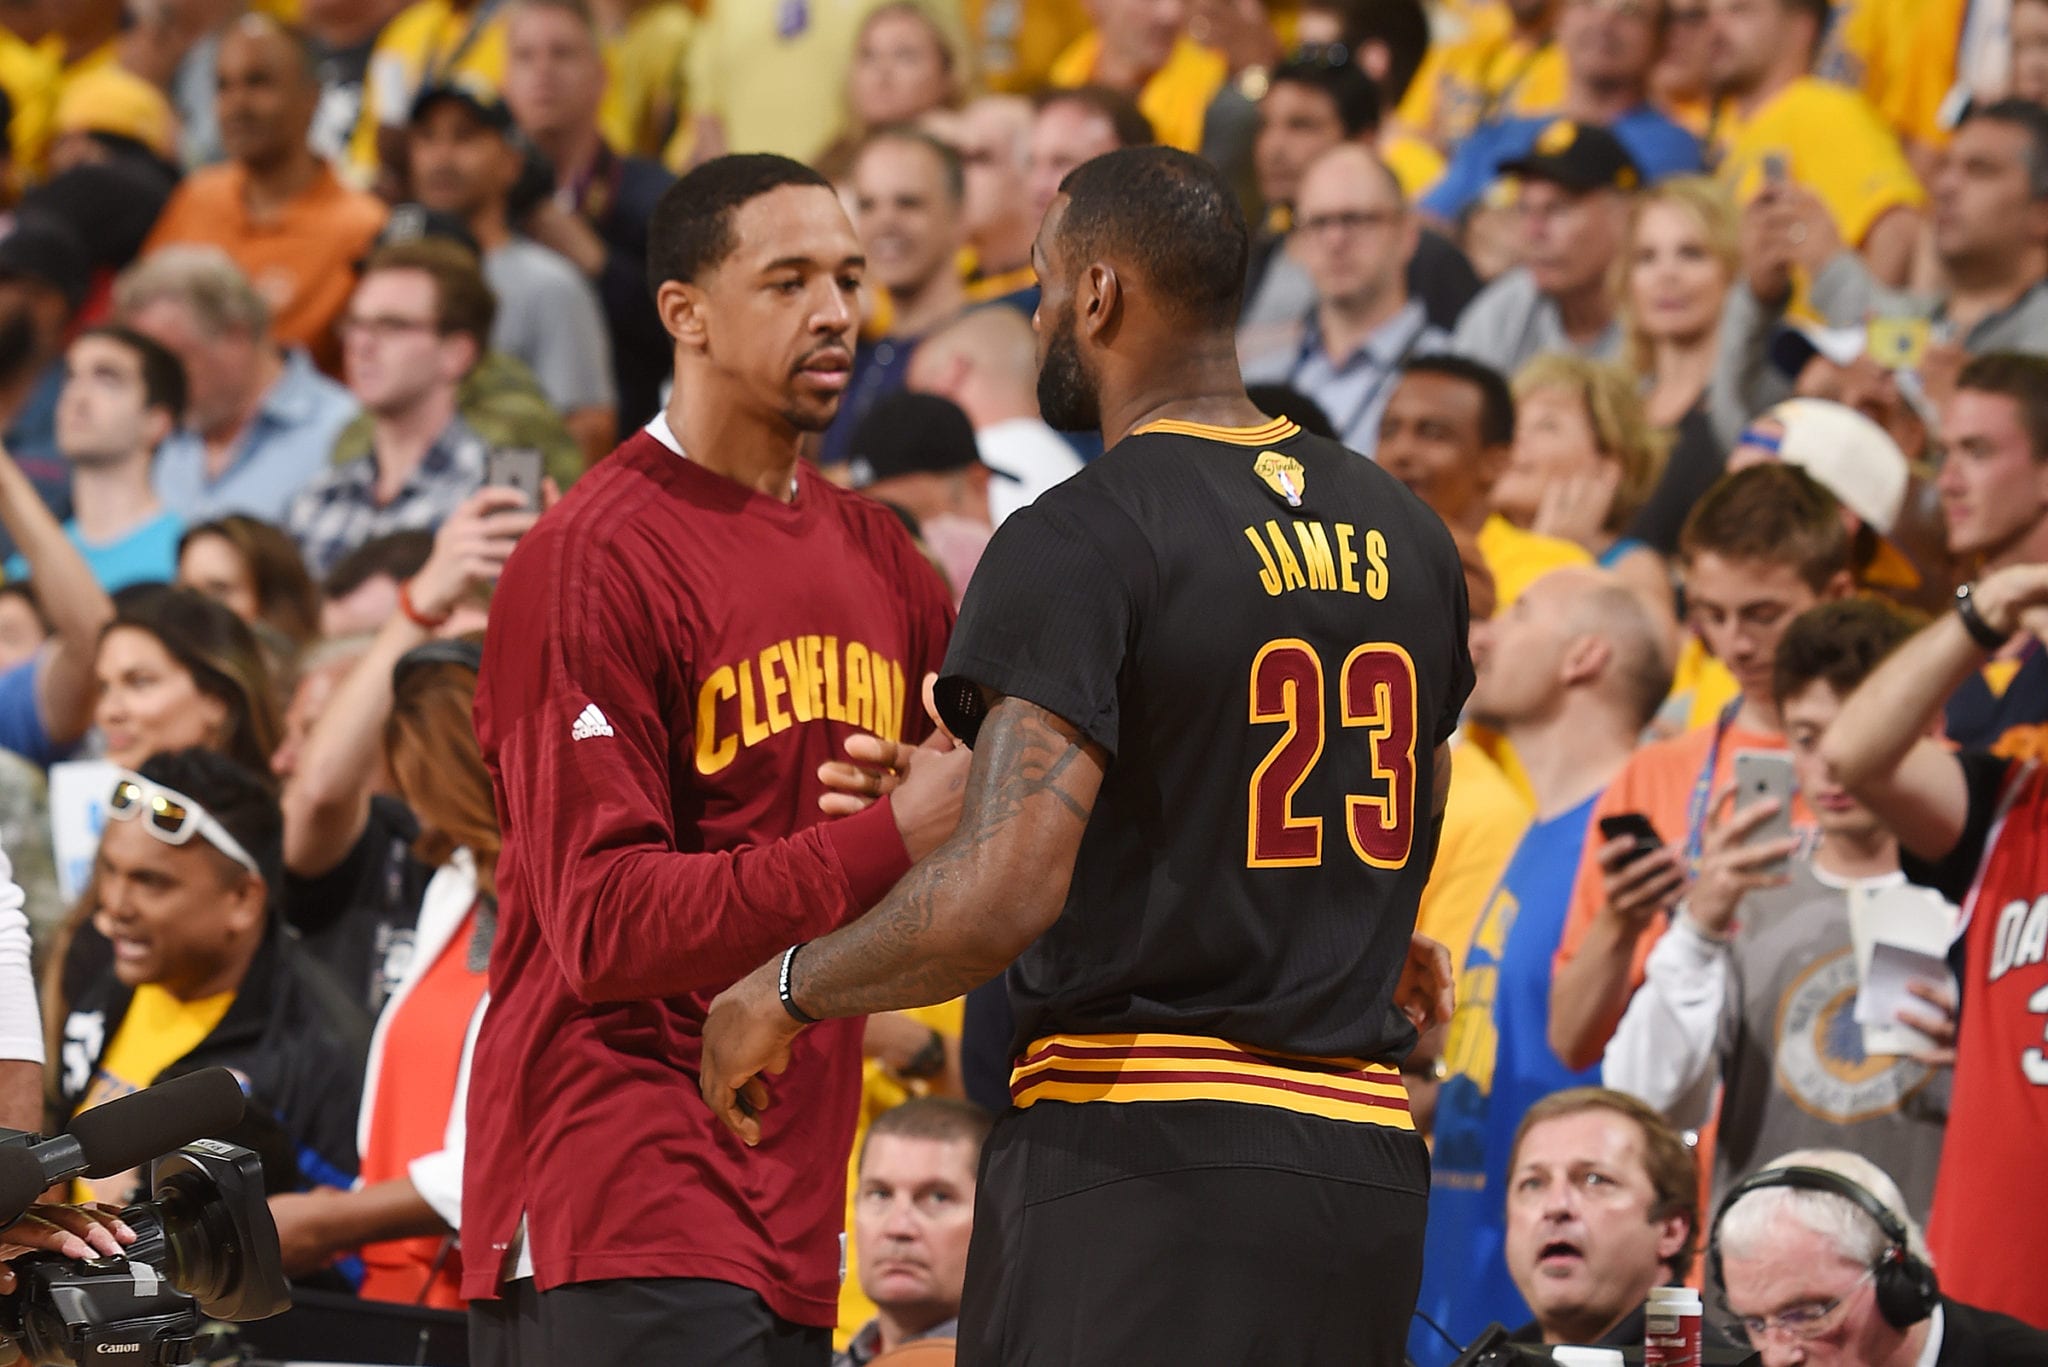 Channing Frye and LeBron James